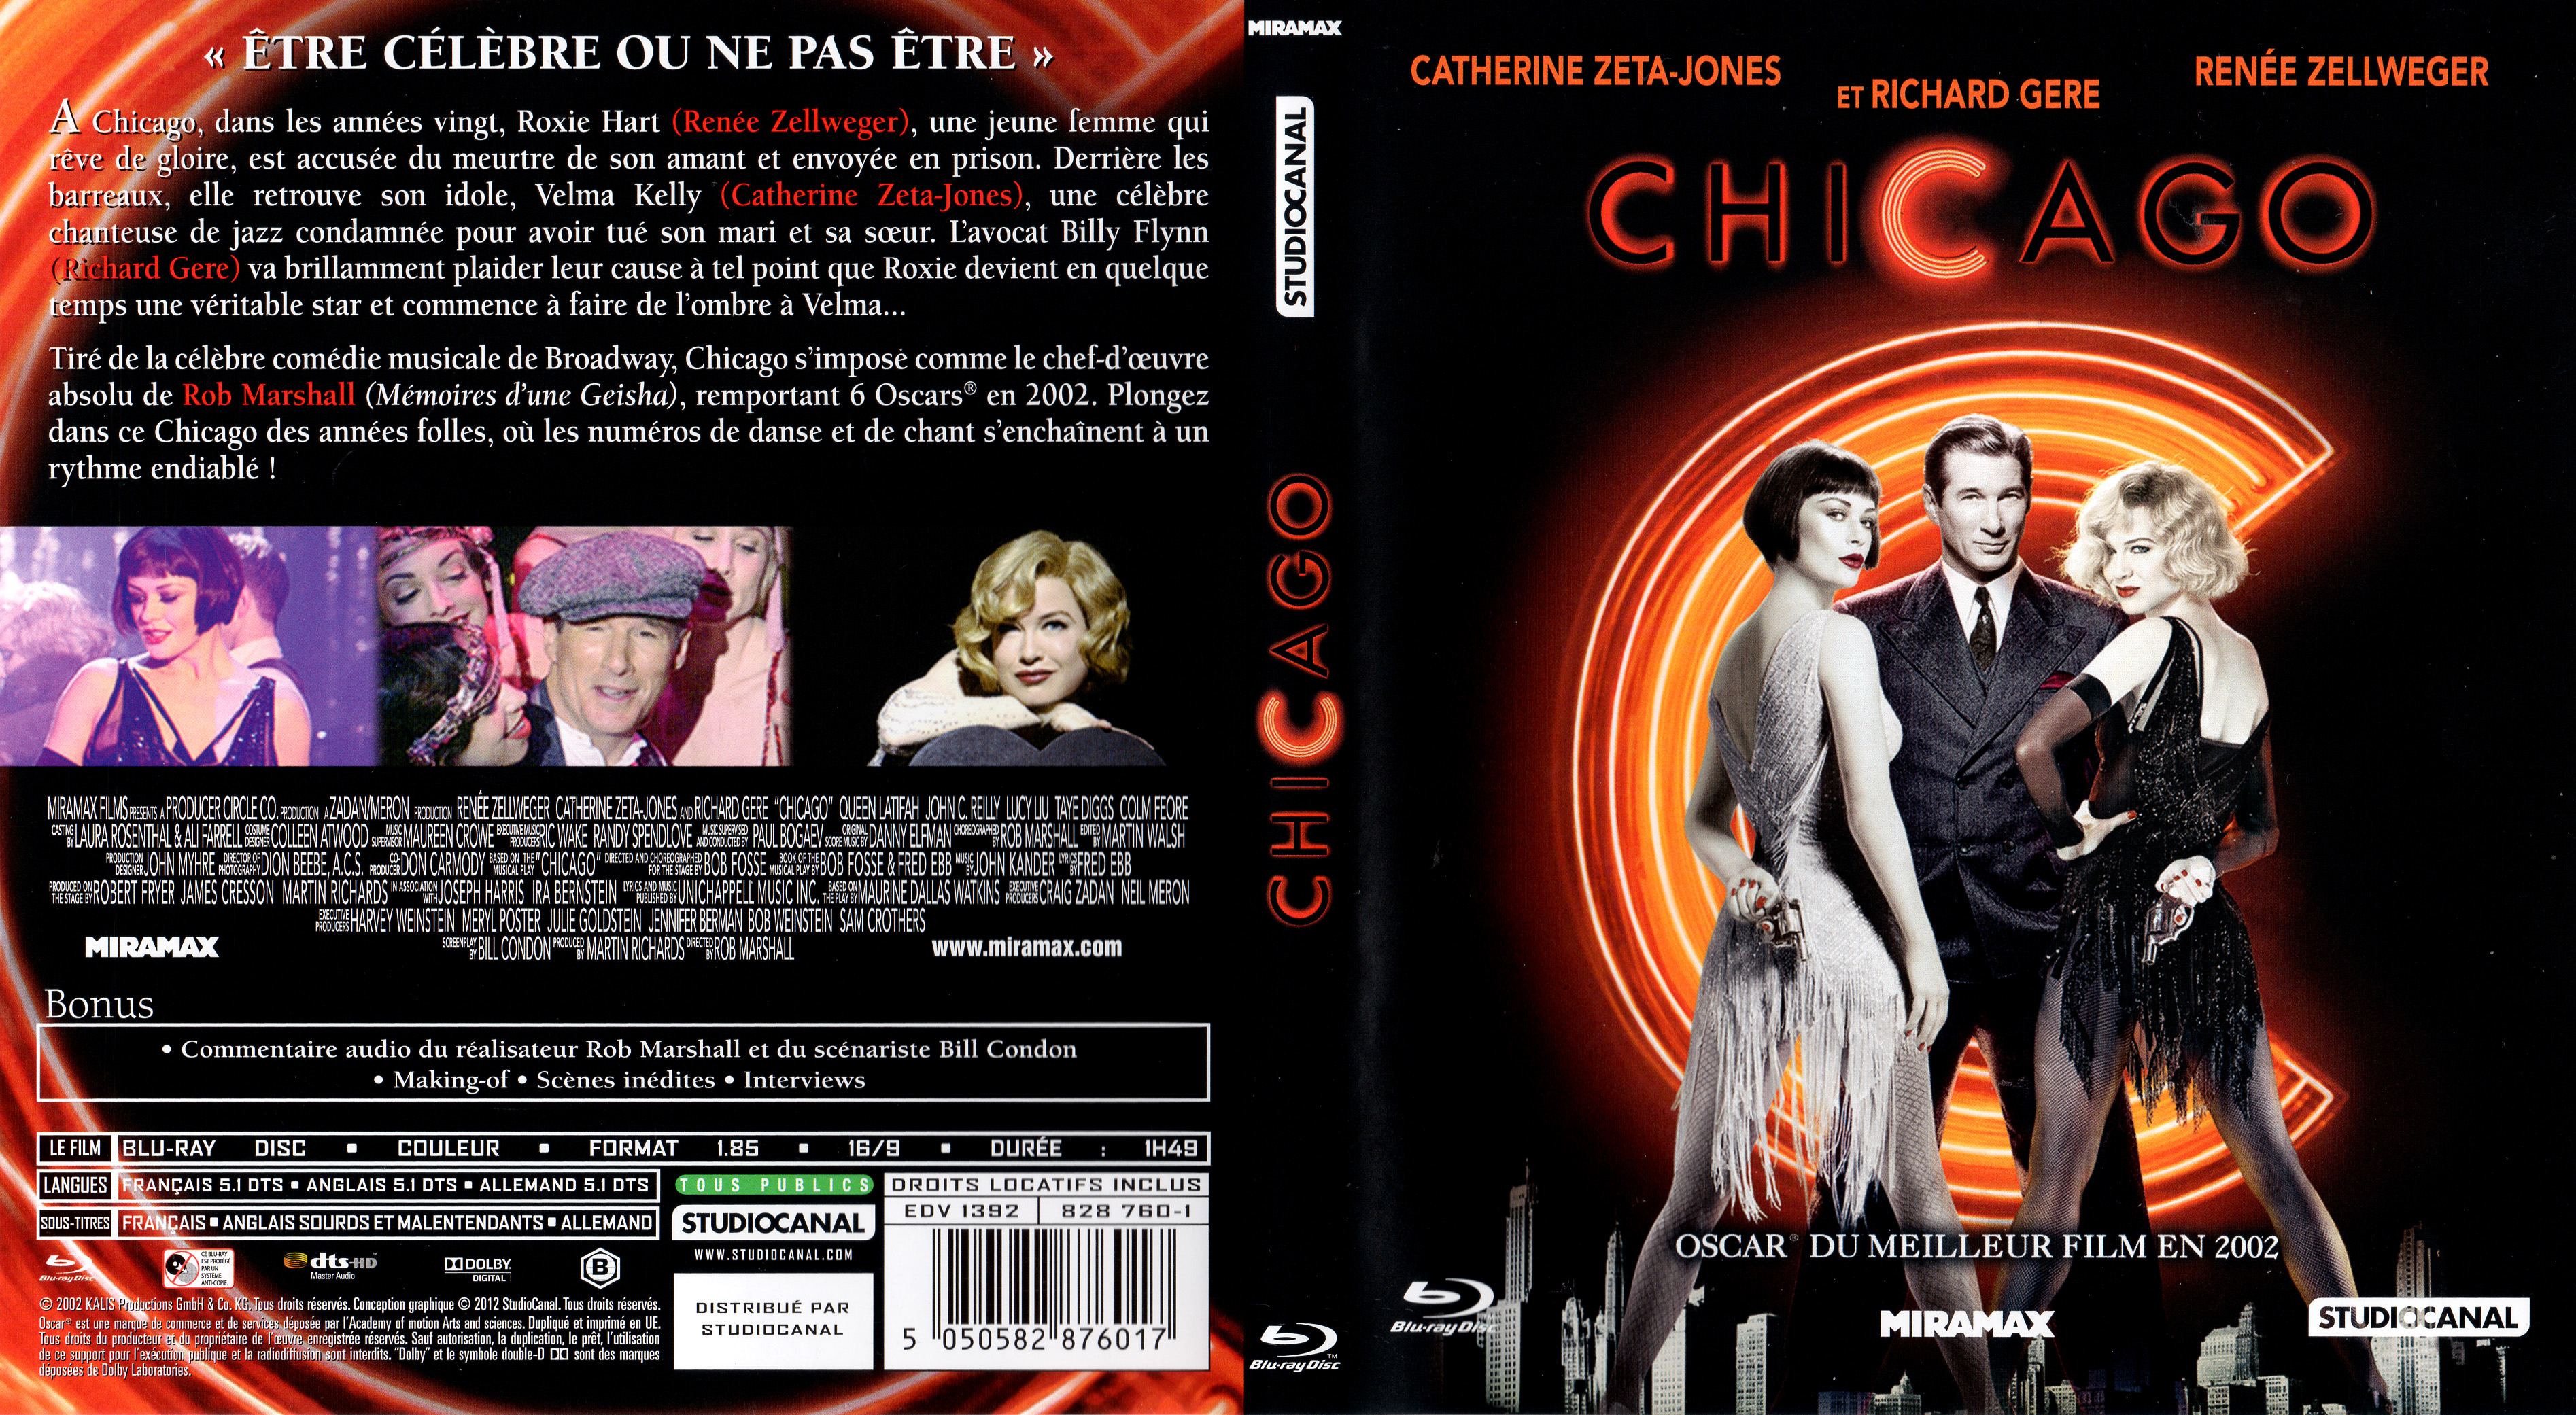 Jaquette DVD Chicago (BLU-RAY) v2